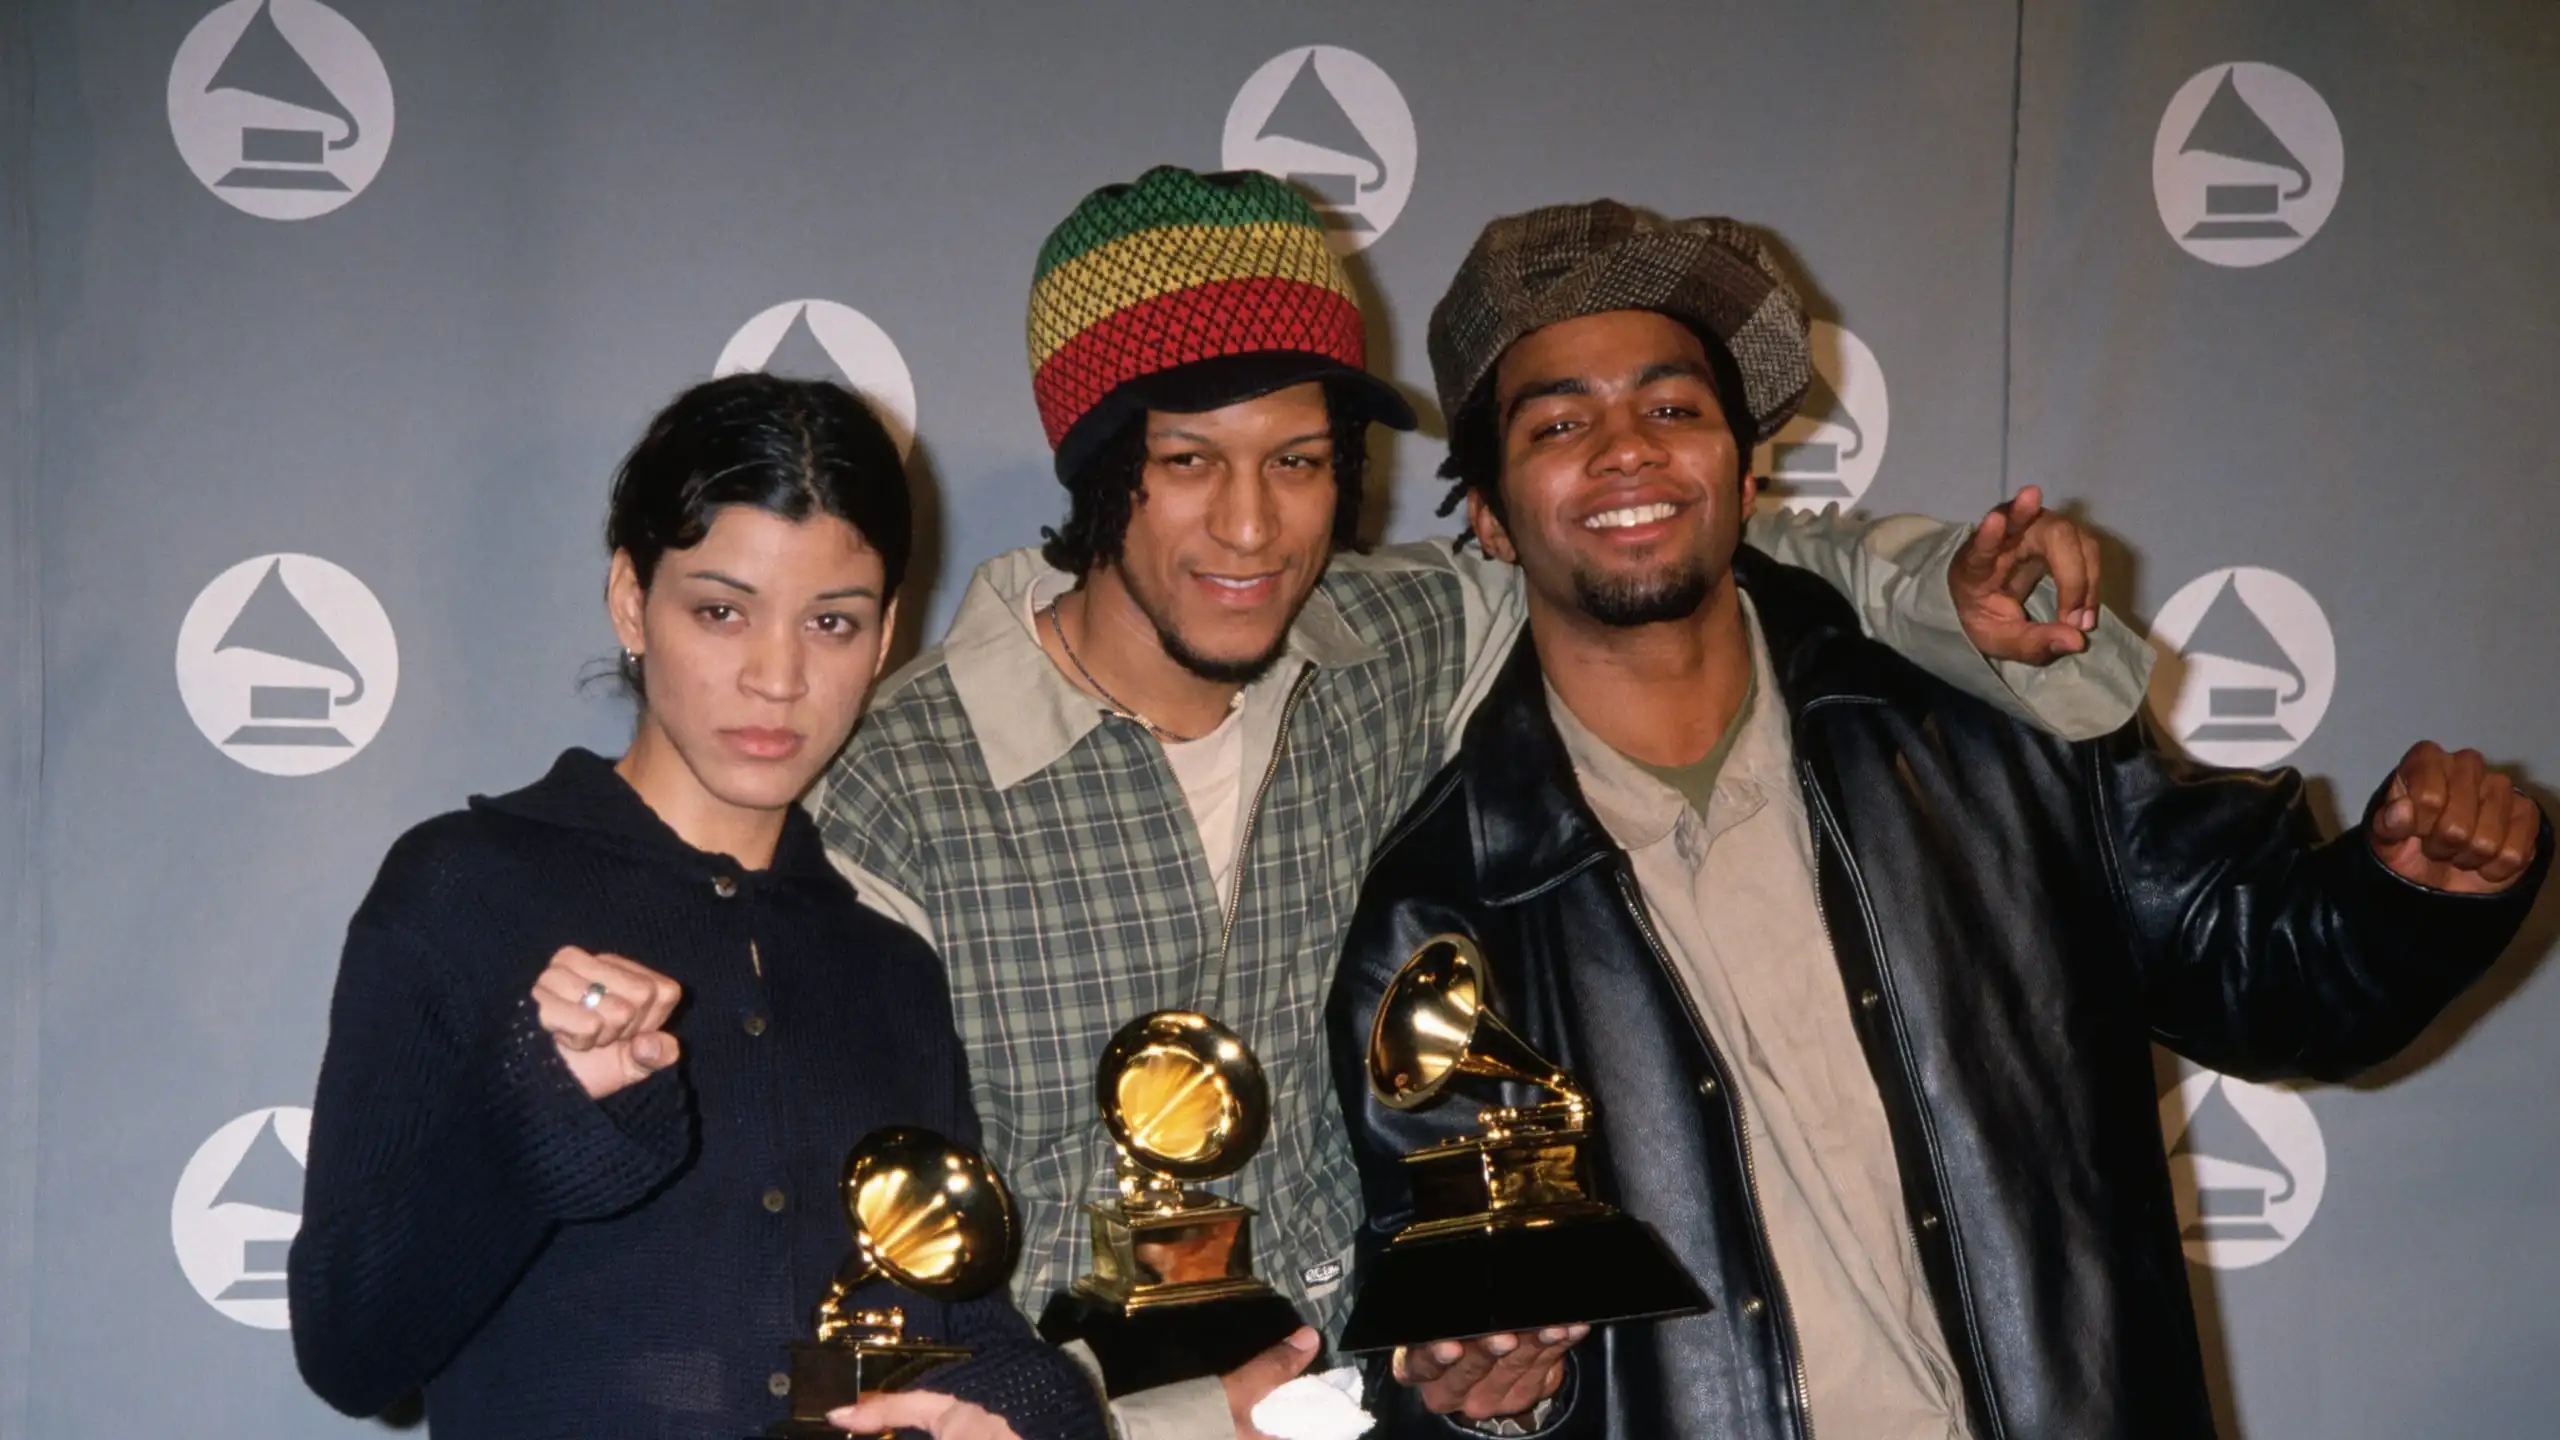 Digable Planets' first album, 'Reachin' (A New Refutation of Time 